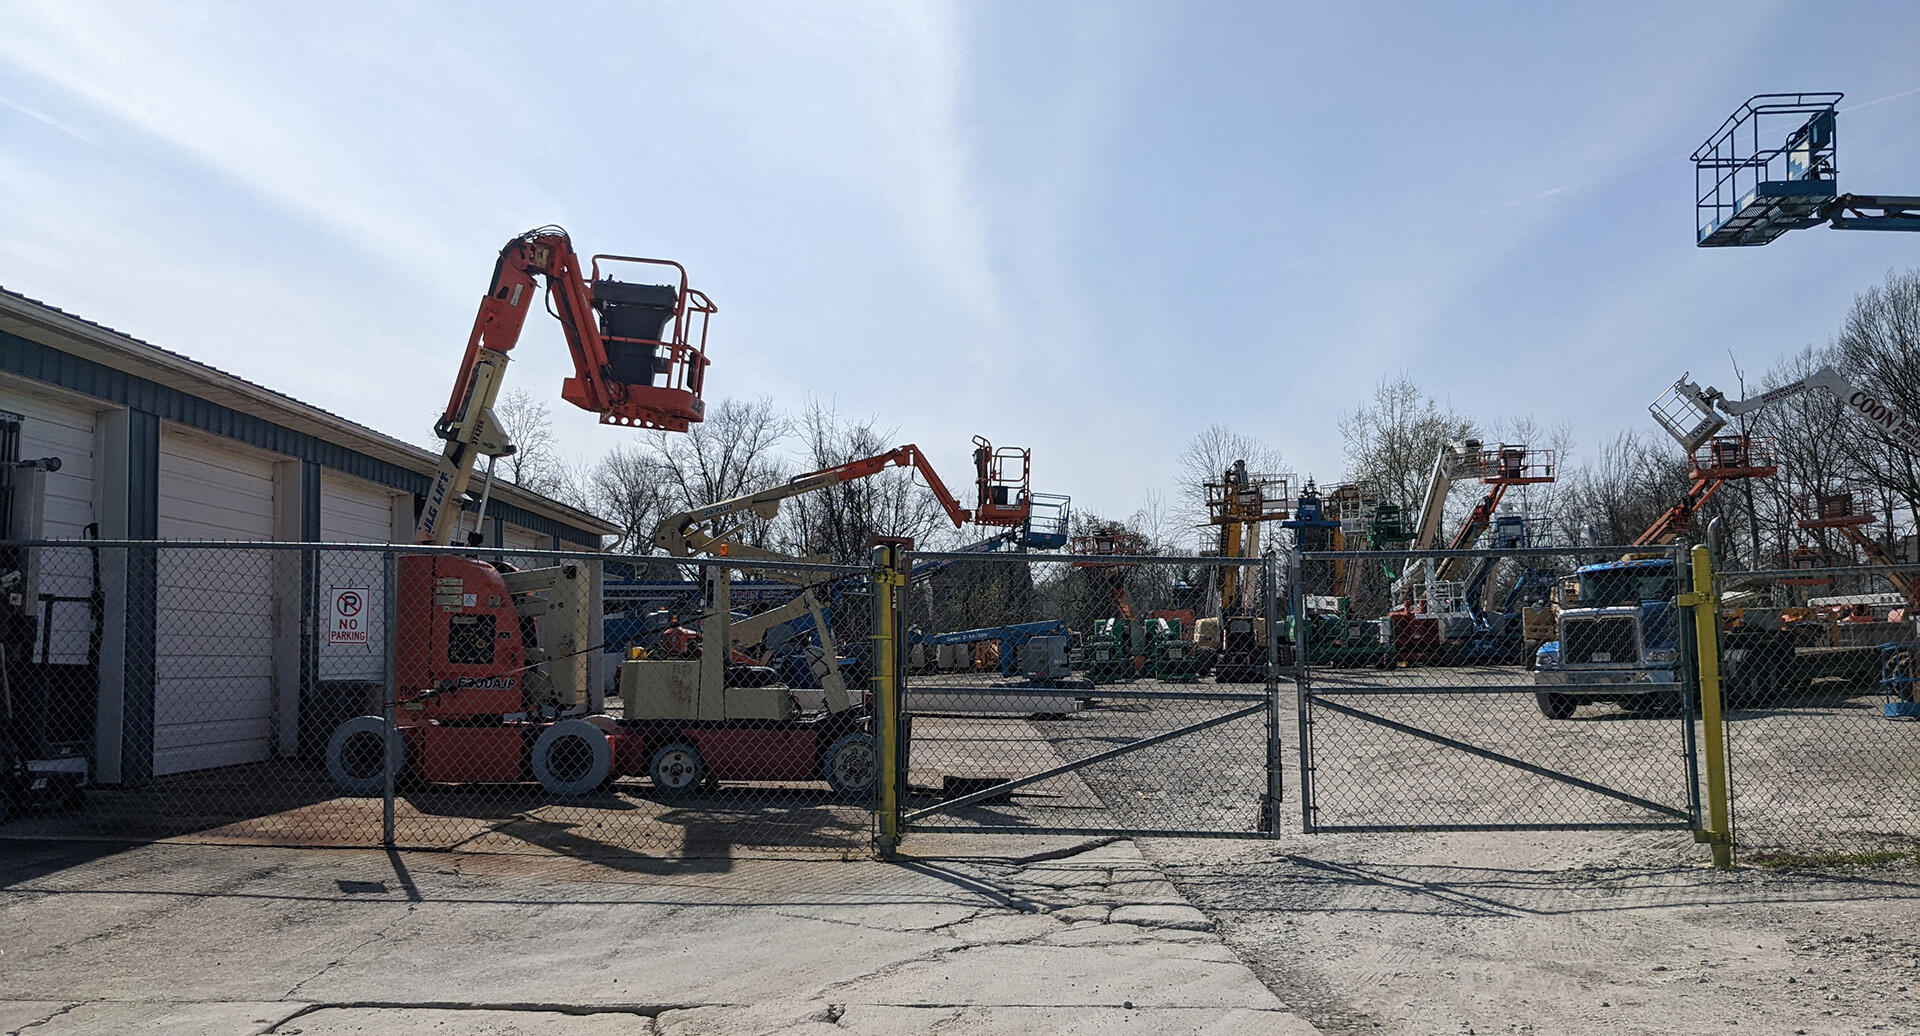 Aerial lift equipment in operation, as serviced by Northern Ohio Equipment Services in Medina, Ohio